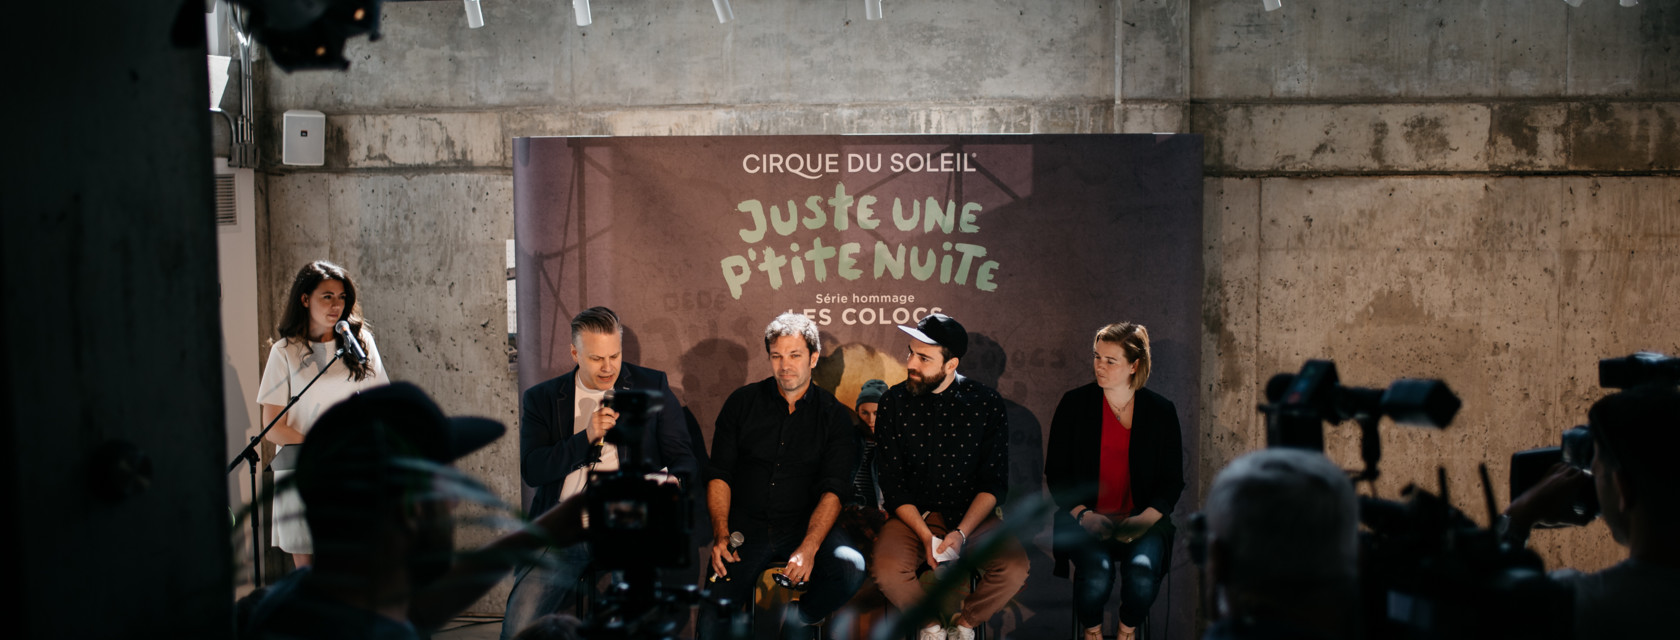 Unveiling an excerpt from a number of Juste une p’tite nuite – Hommage aux Colocs